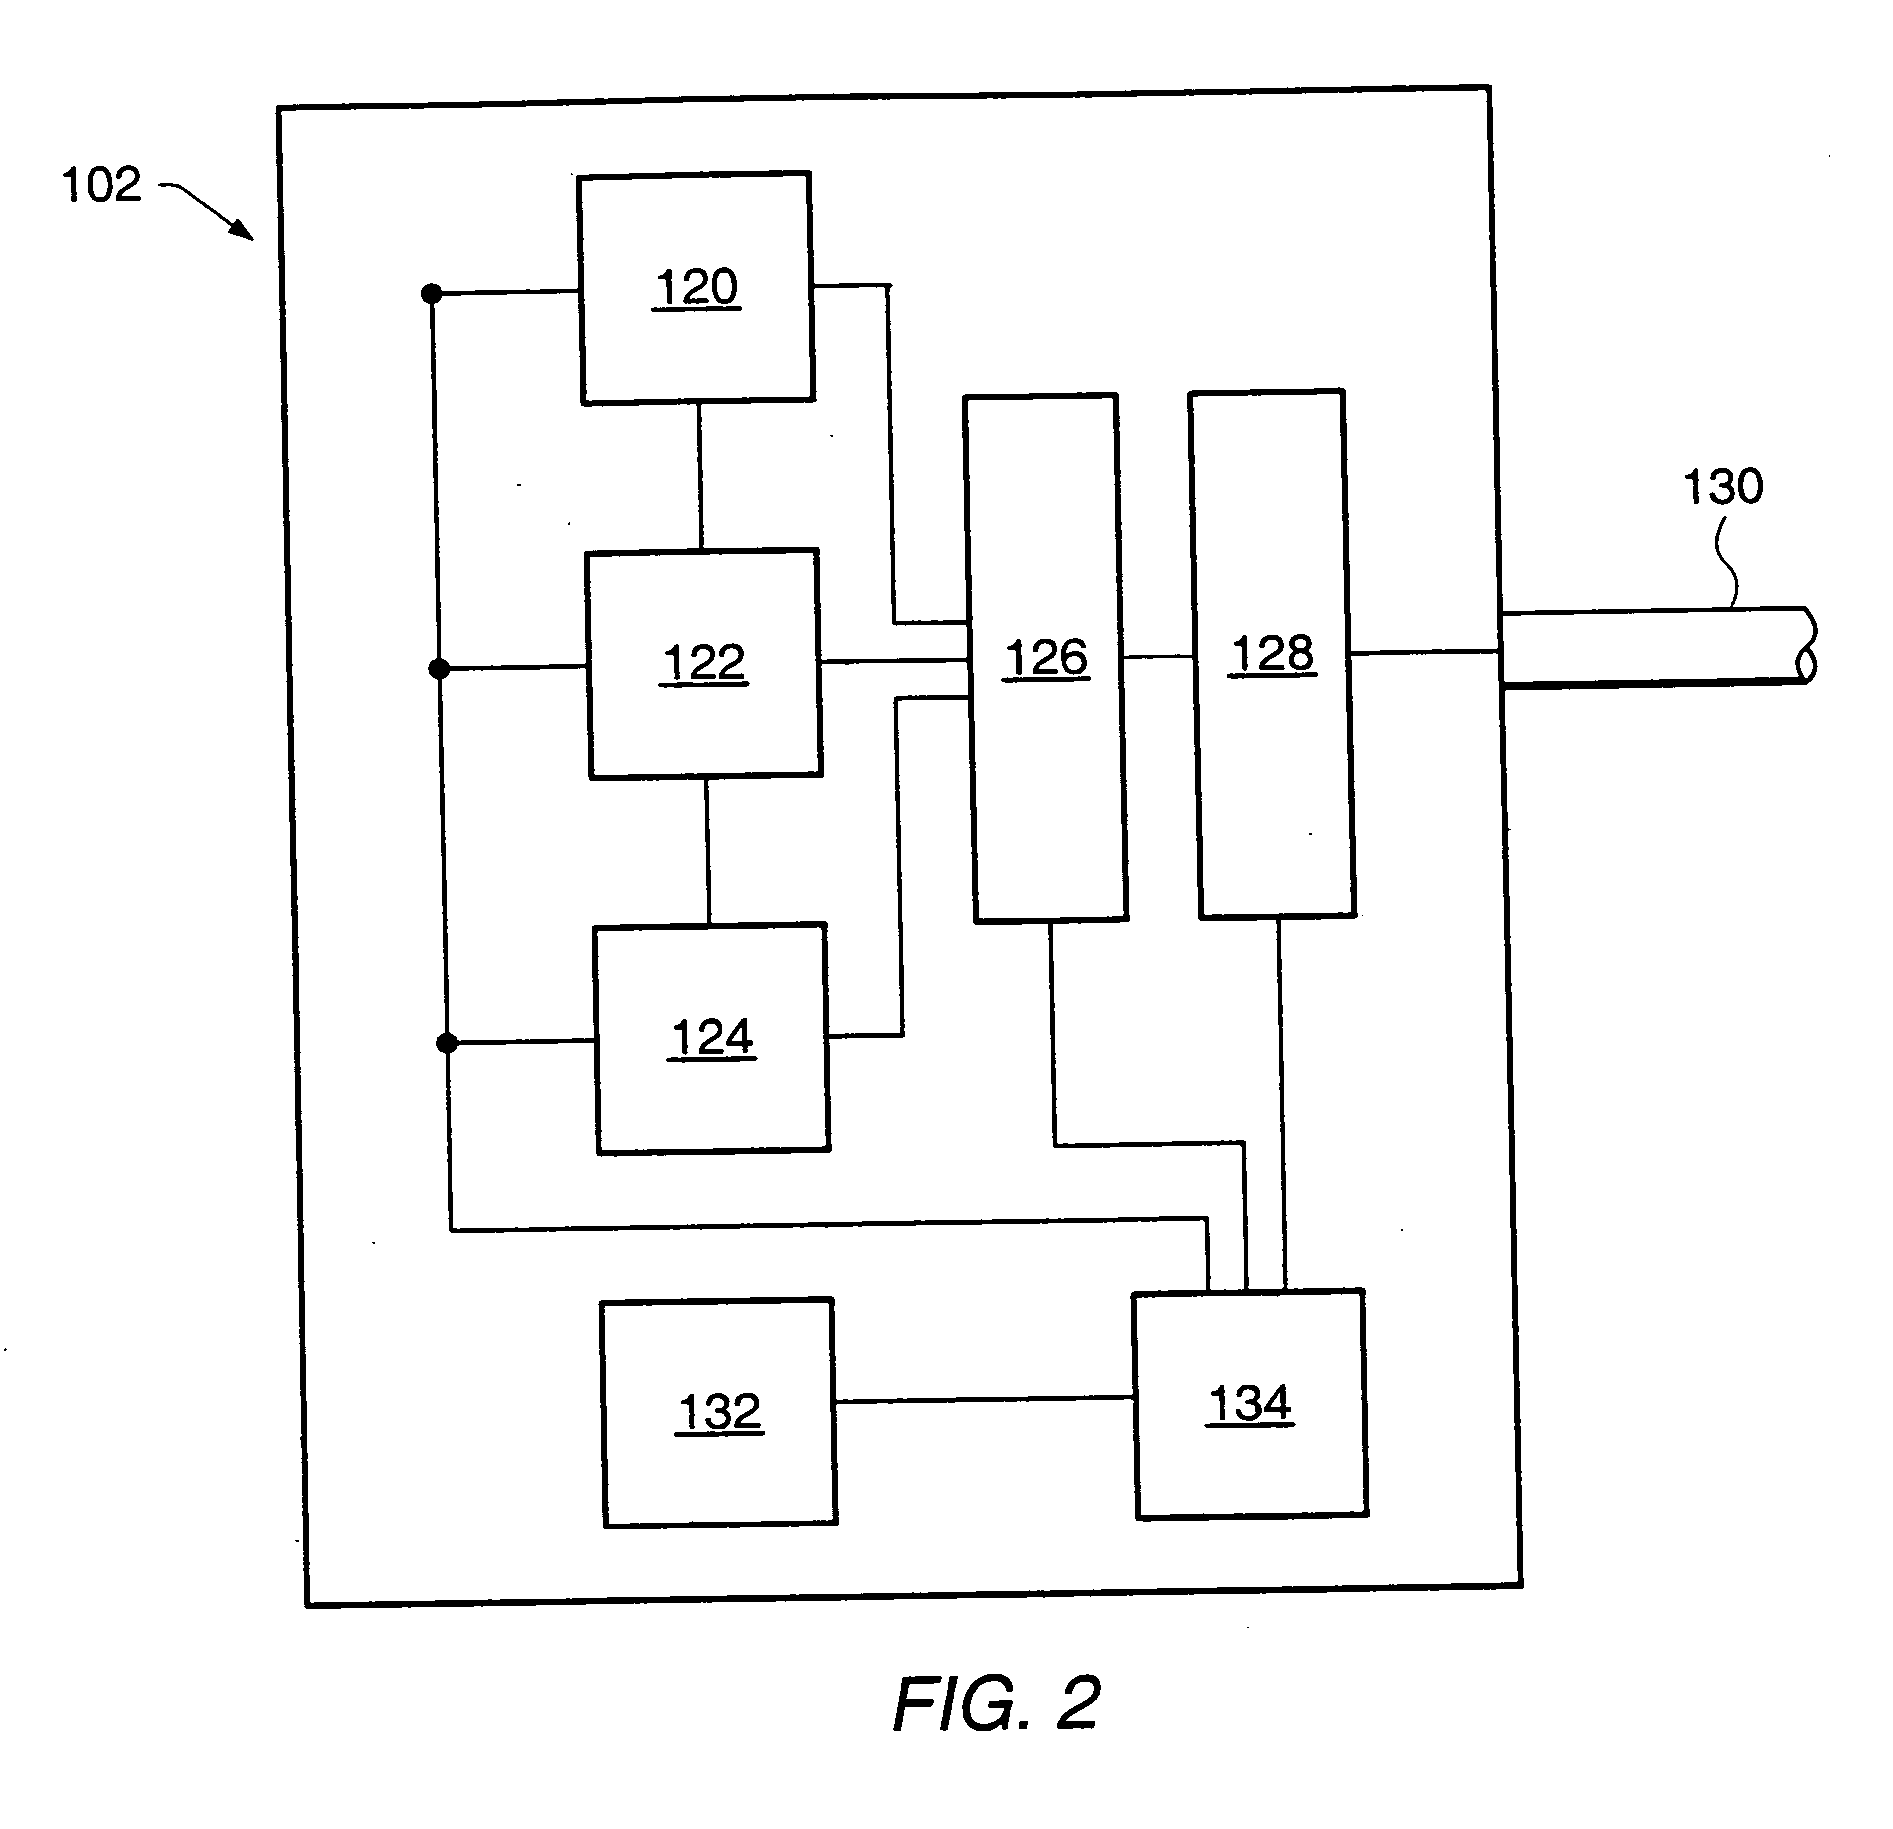 Water irrigation system with solar panel and method of controlling irrigation